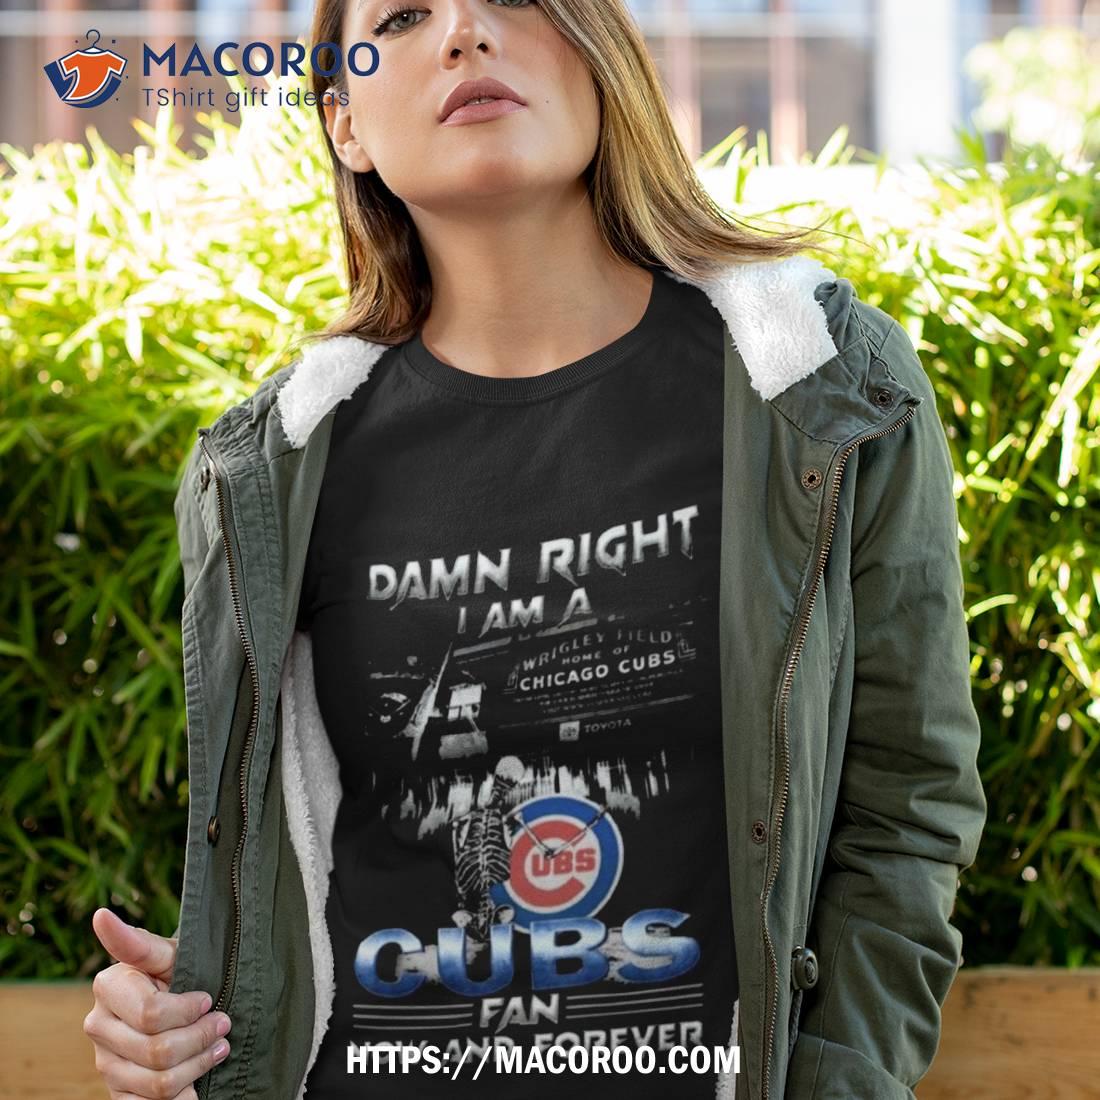 Skeleton Damn Right I Am A Chicago Cubs Fan Now And Forever T Shirt